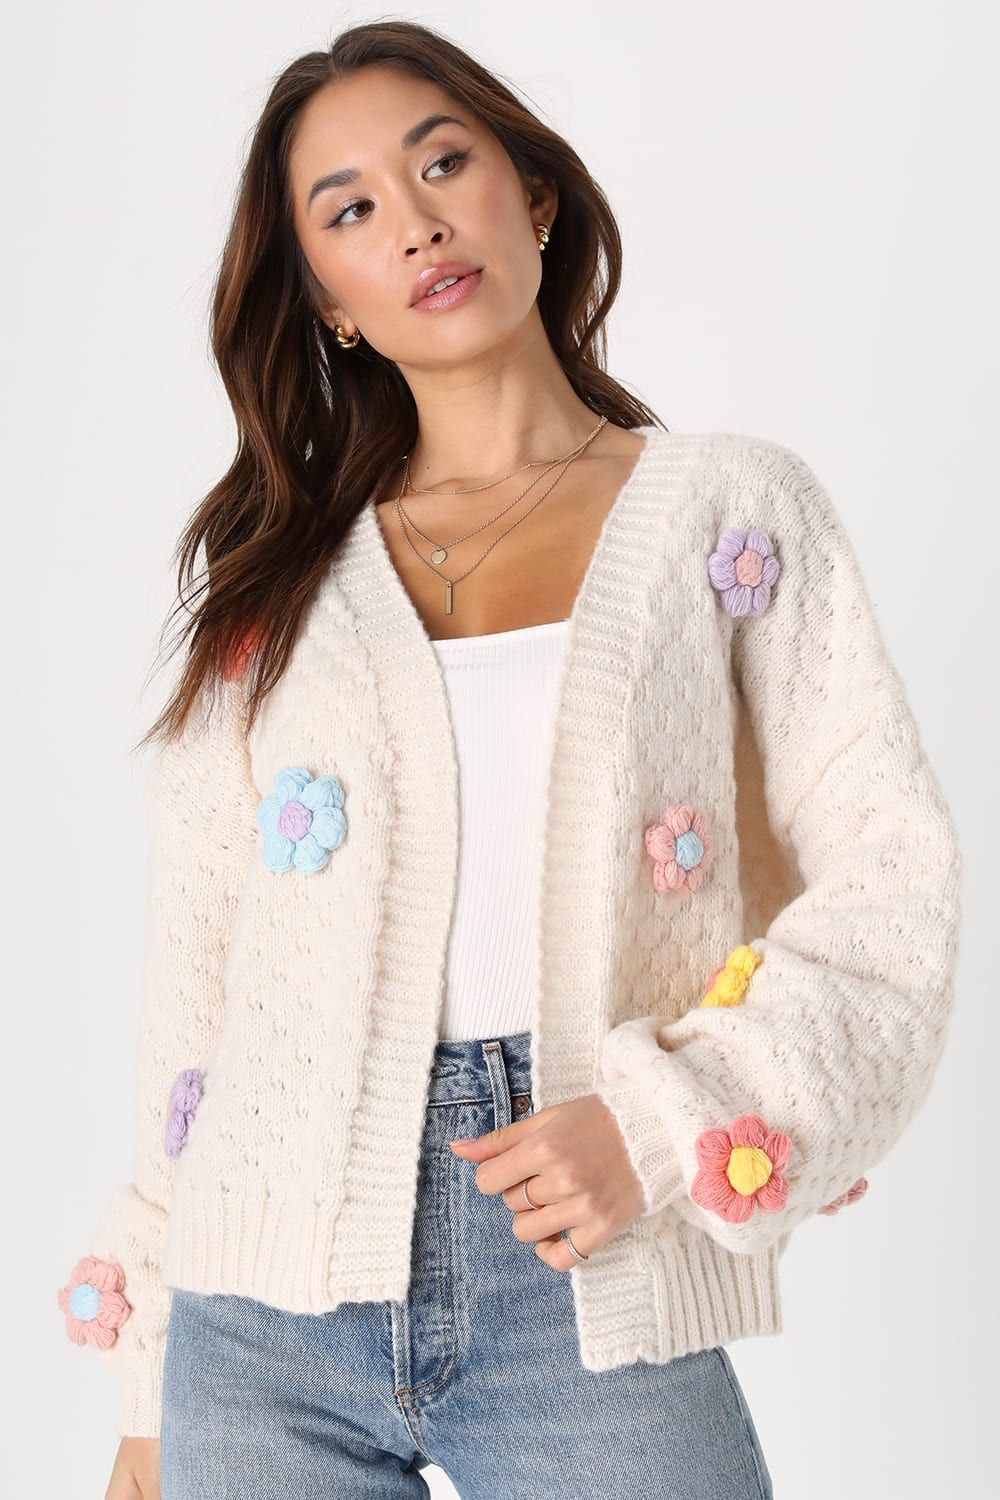 Chosen Charm Cream Knit Open-Front Embroidered Shrug Sweater | Lulus (US)